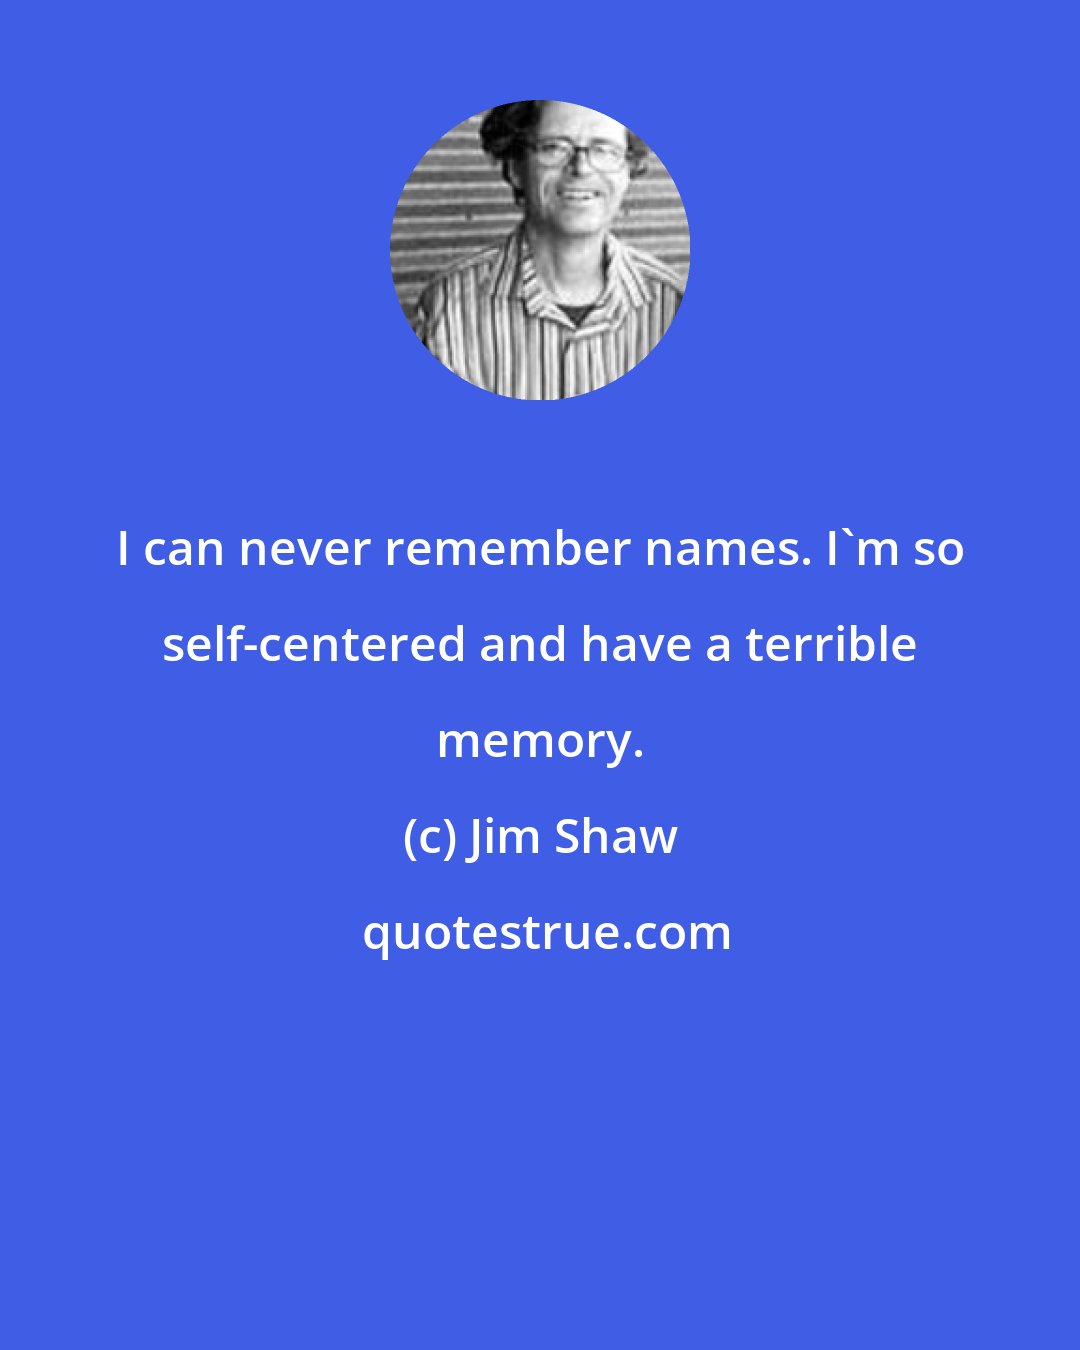 Jim Shaw: I can never remember names. I'm so self-centered and have a terrible memory.